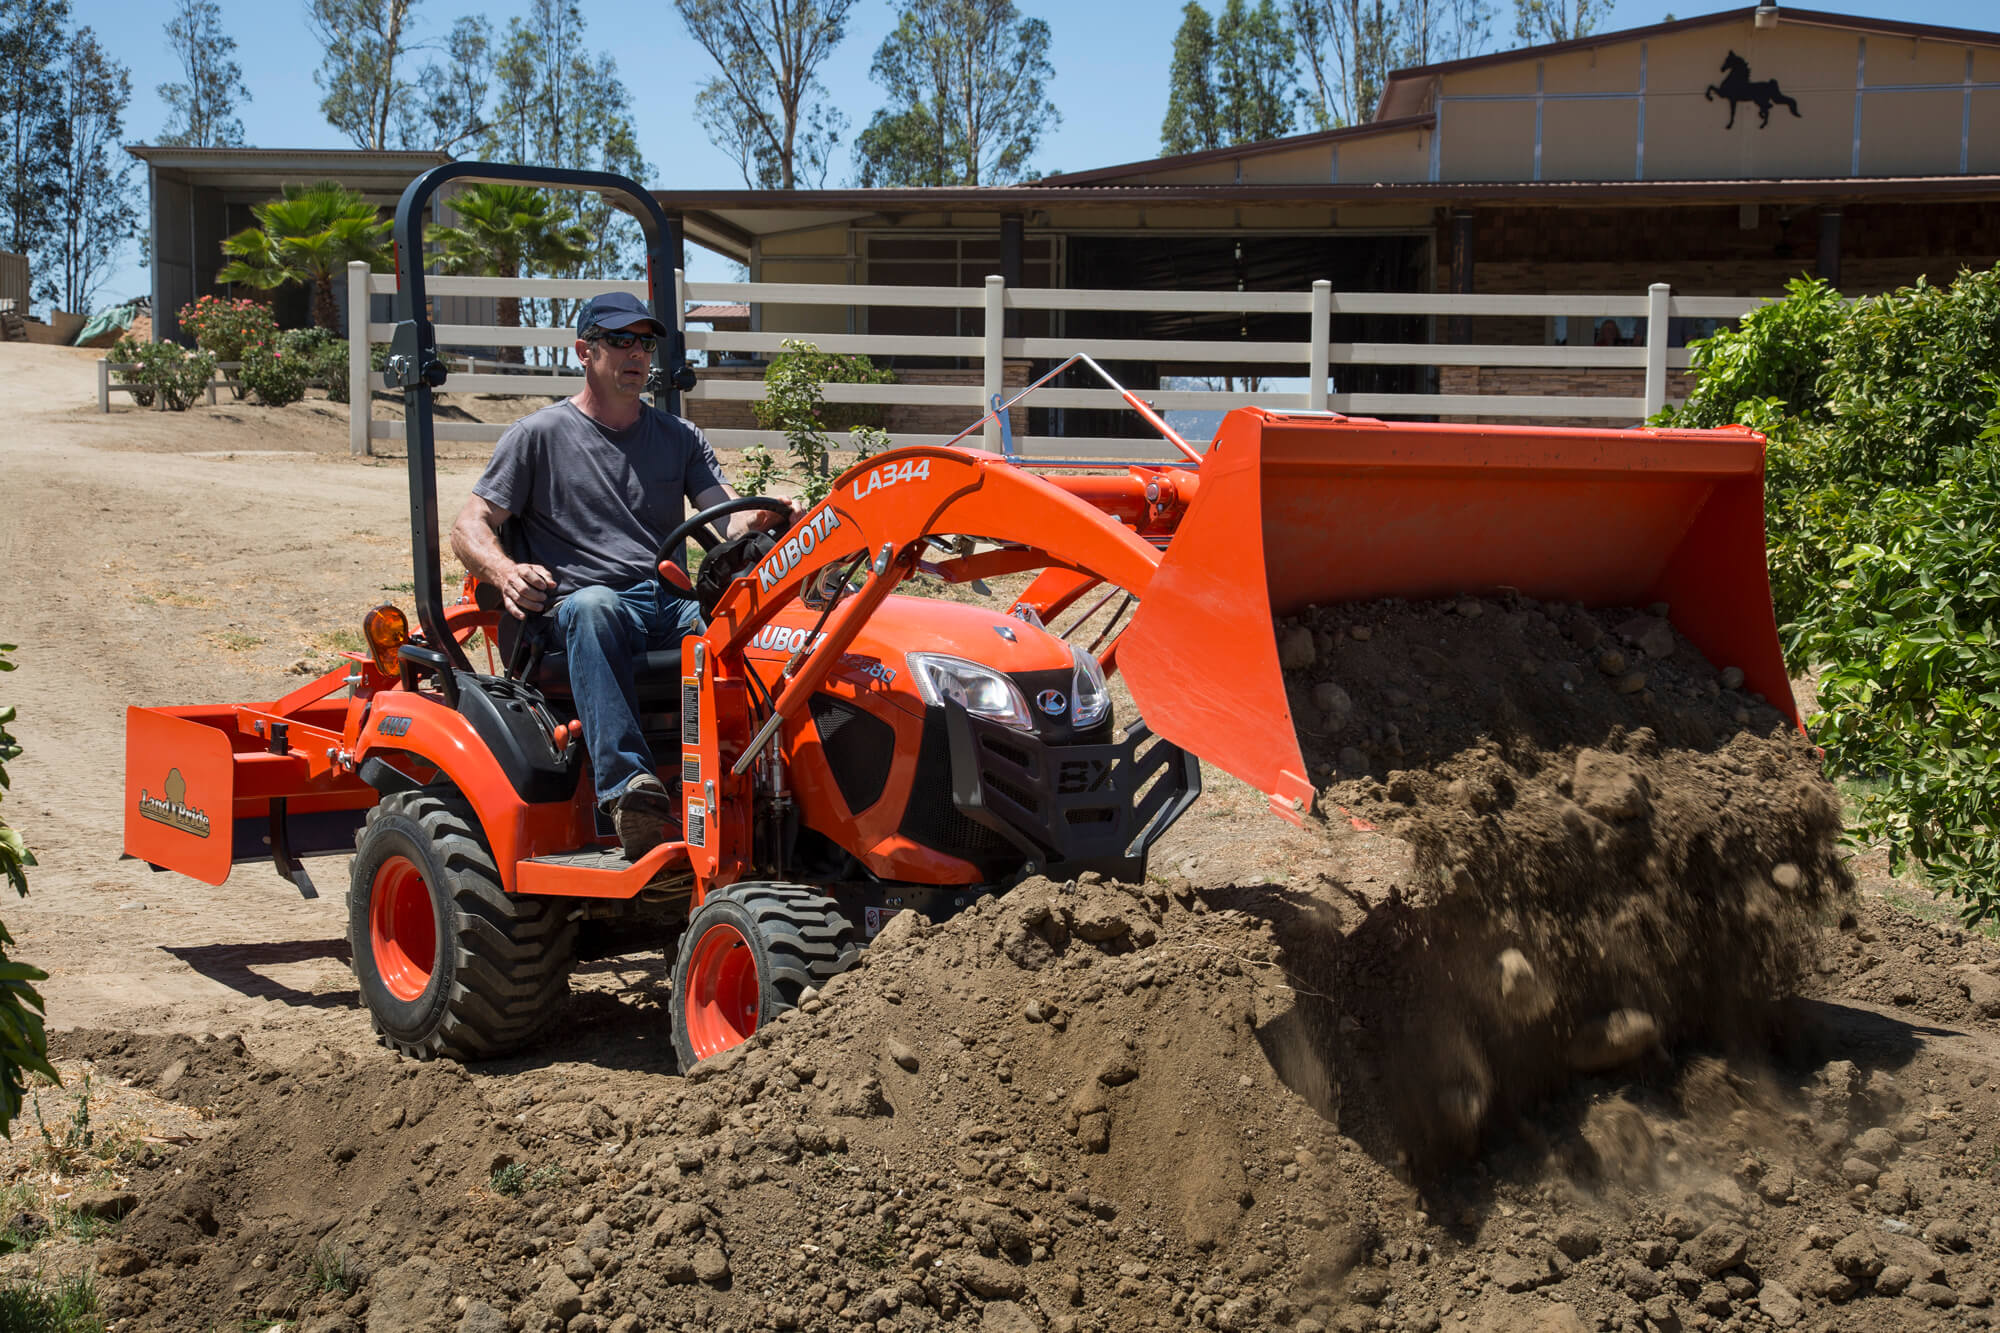 Kubota tractor with loader